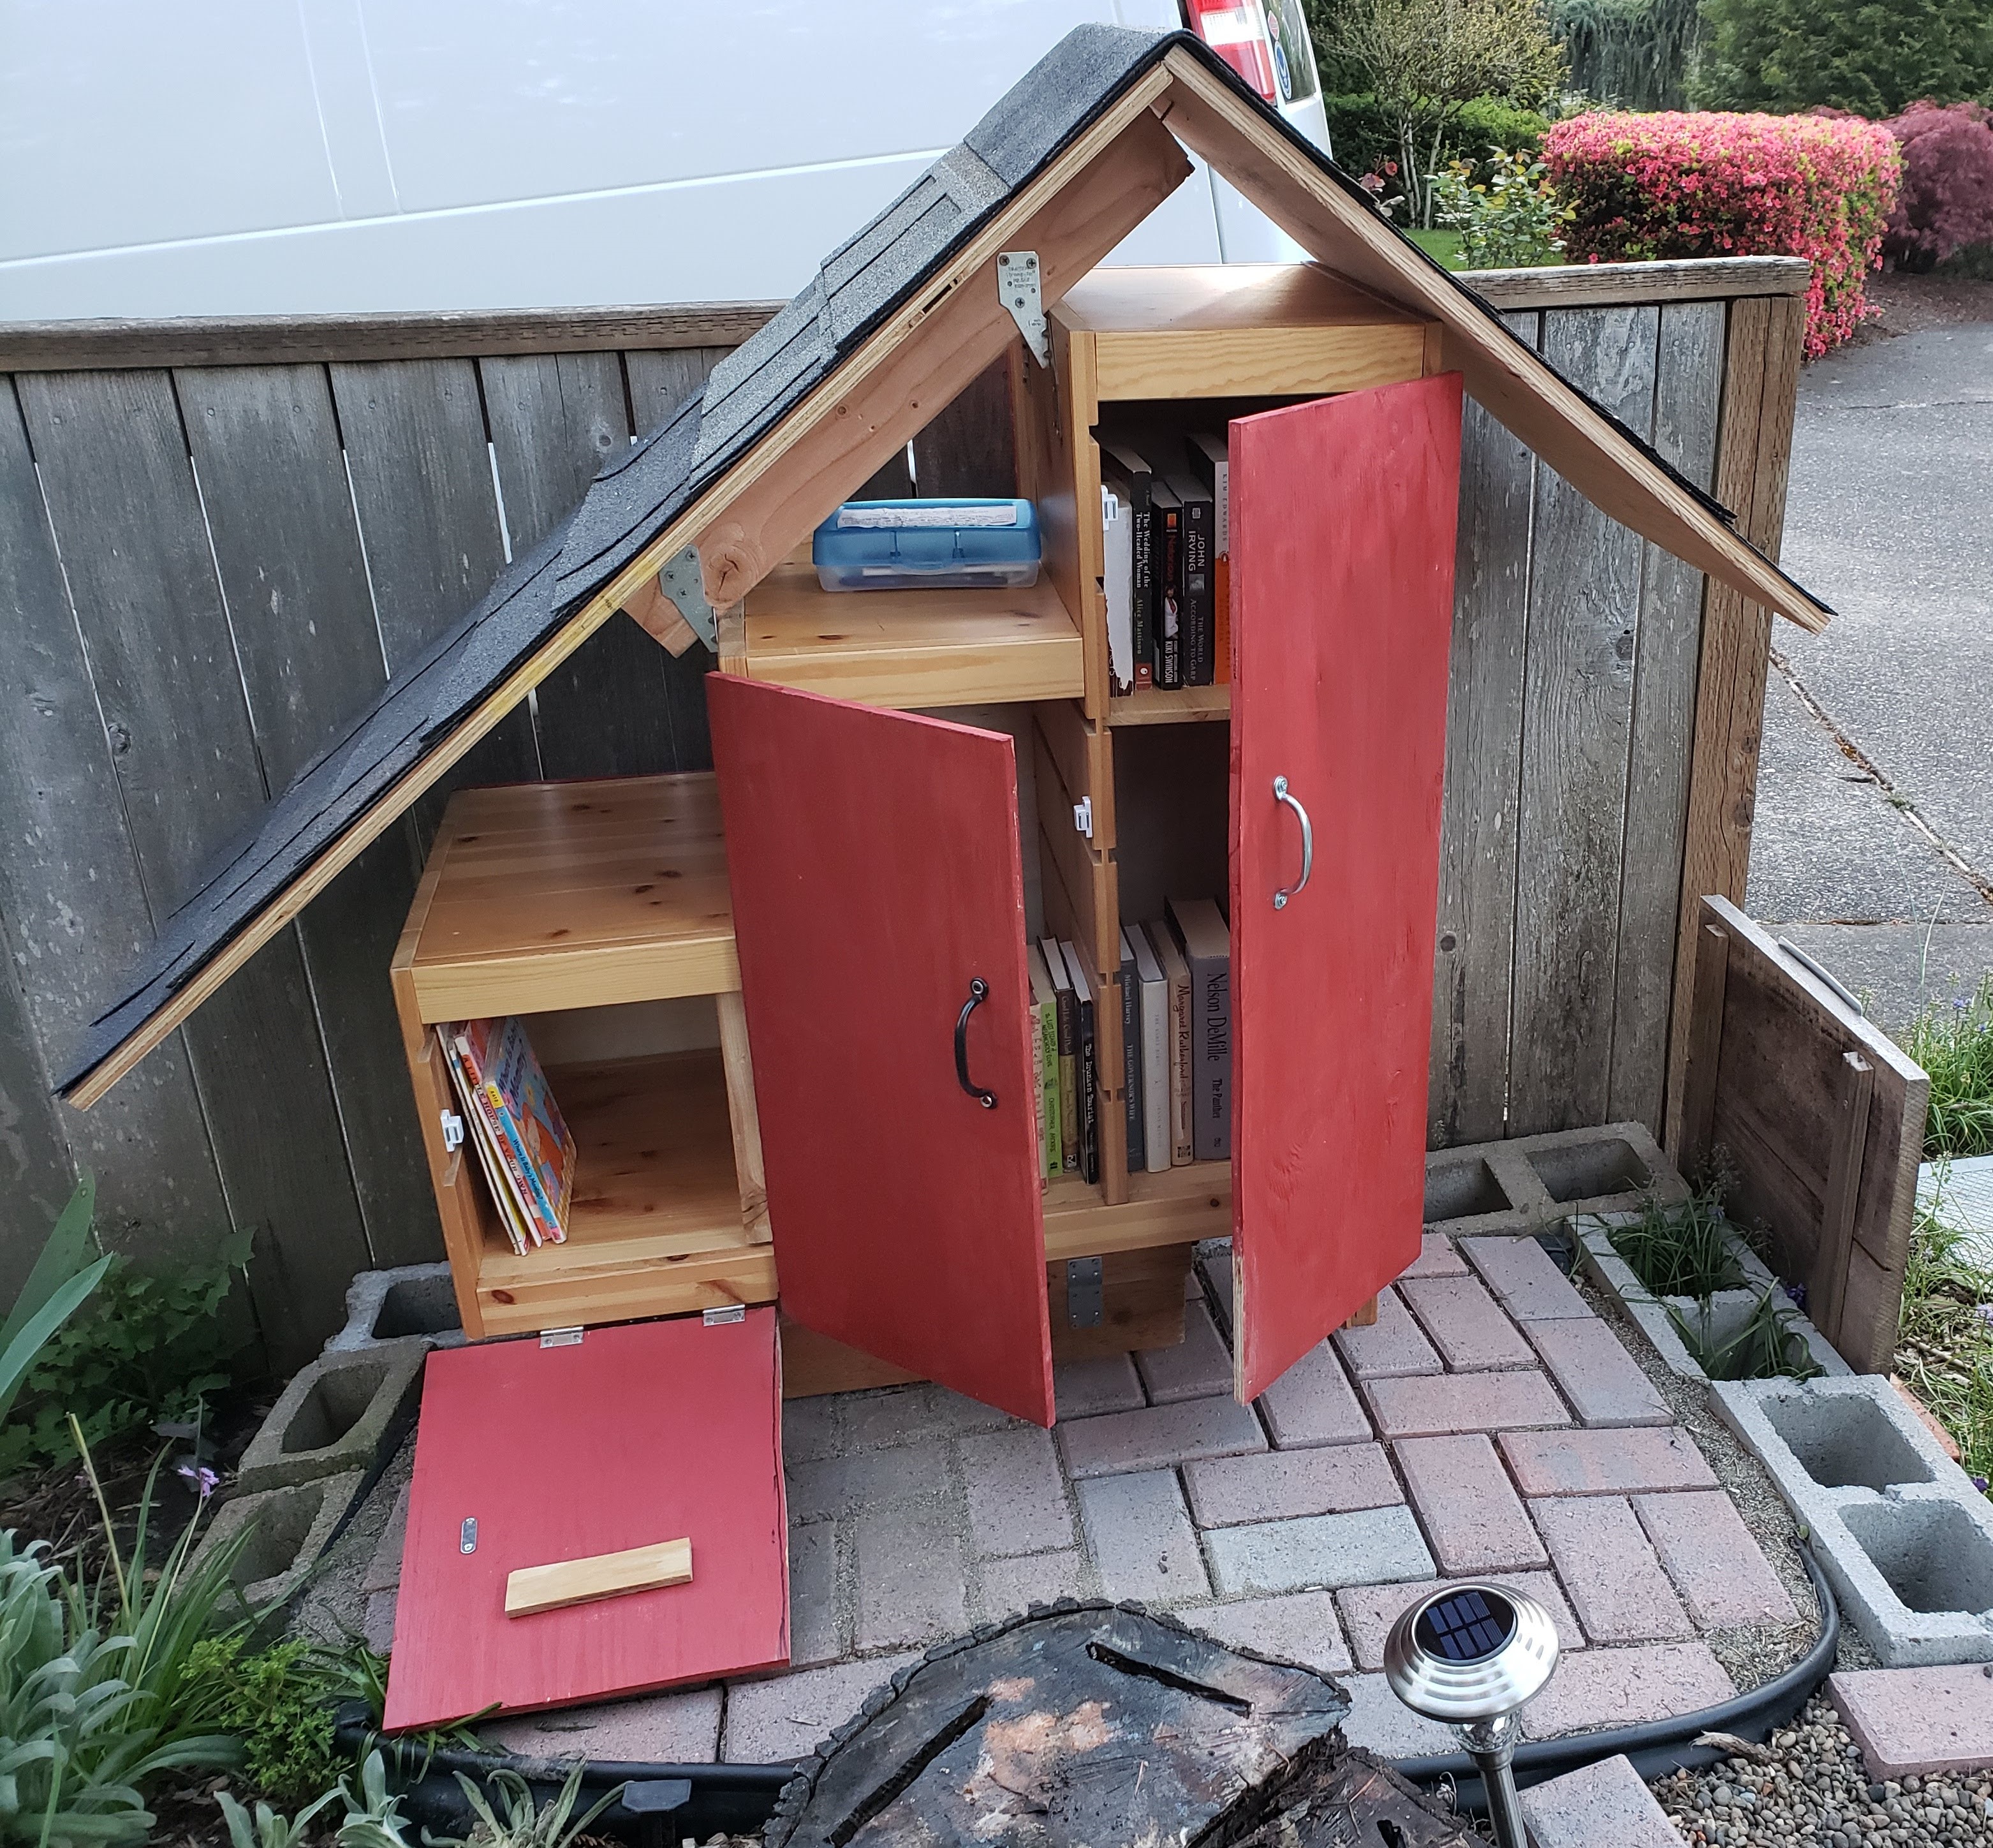 Front view of the Little Free Library, with the doors open - showing that they each open in a different direction, and giving a peek at the books inside.